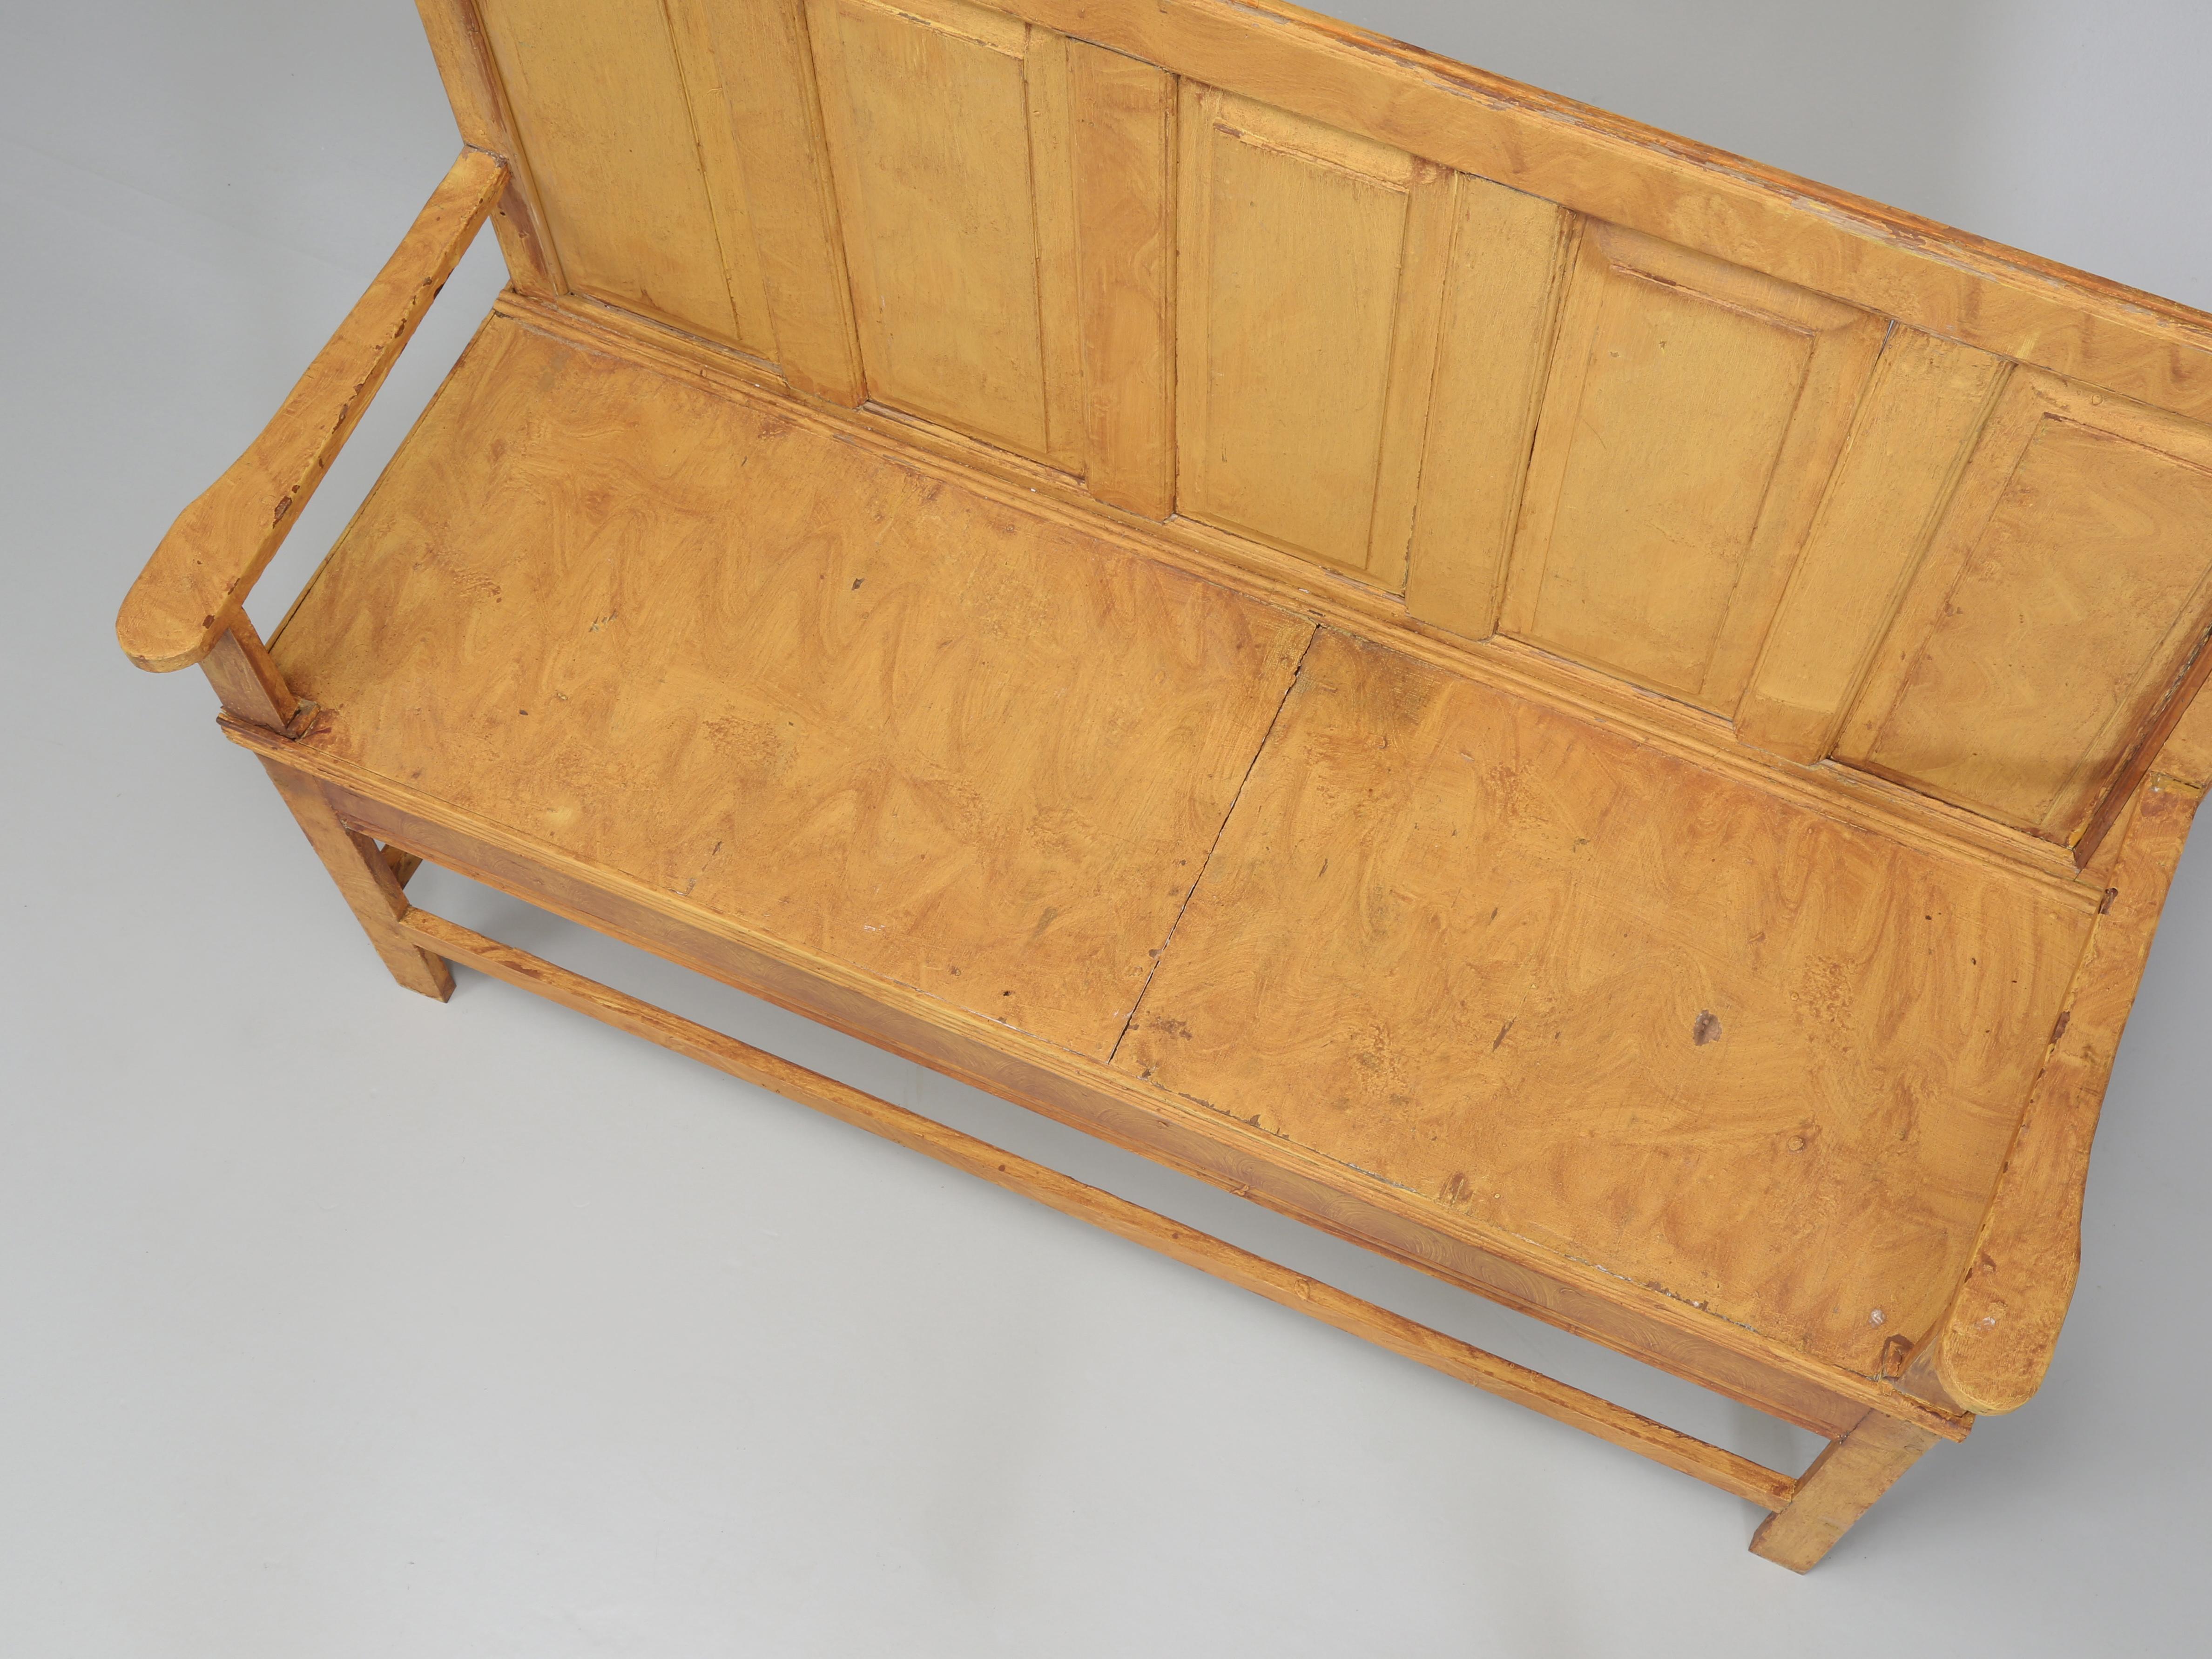 Late 19th Century Antique Irish Pine Bench in an Old Scumbled Painted Finish Late 1800's Original For Sale